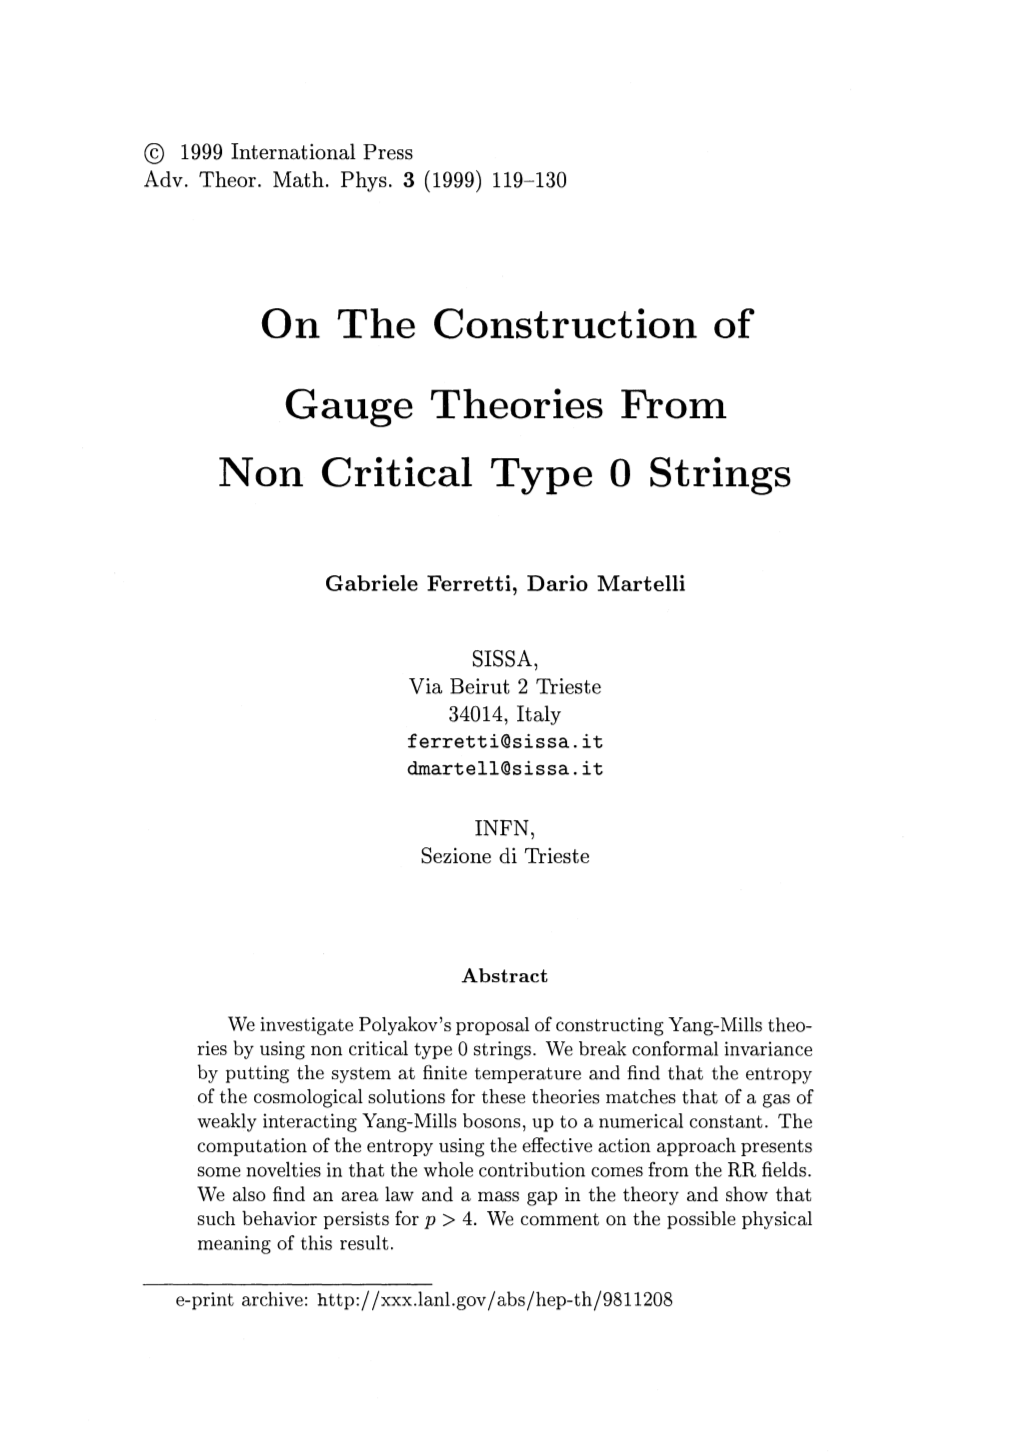 On the Construction of Gauge Theories from Non Critical Type 0 Strings